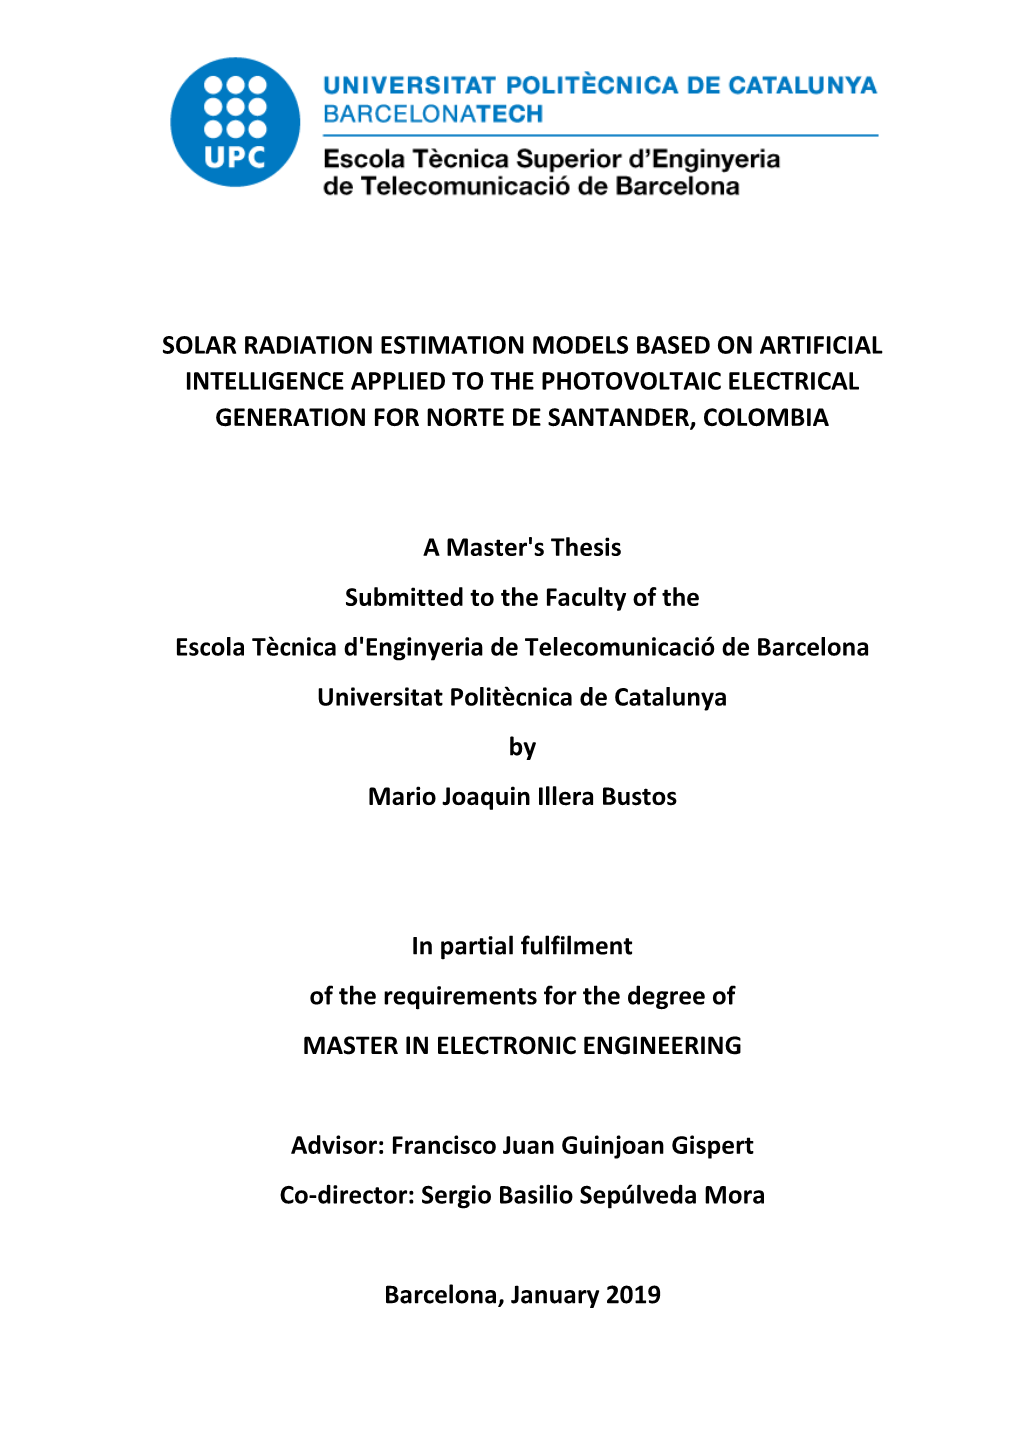 Solar Radiation Estimation Models Based on Artificial Intelligence Applied to the Photovoltaic Electrical Generation for Norte De Santander, Colombia